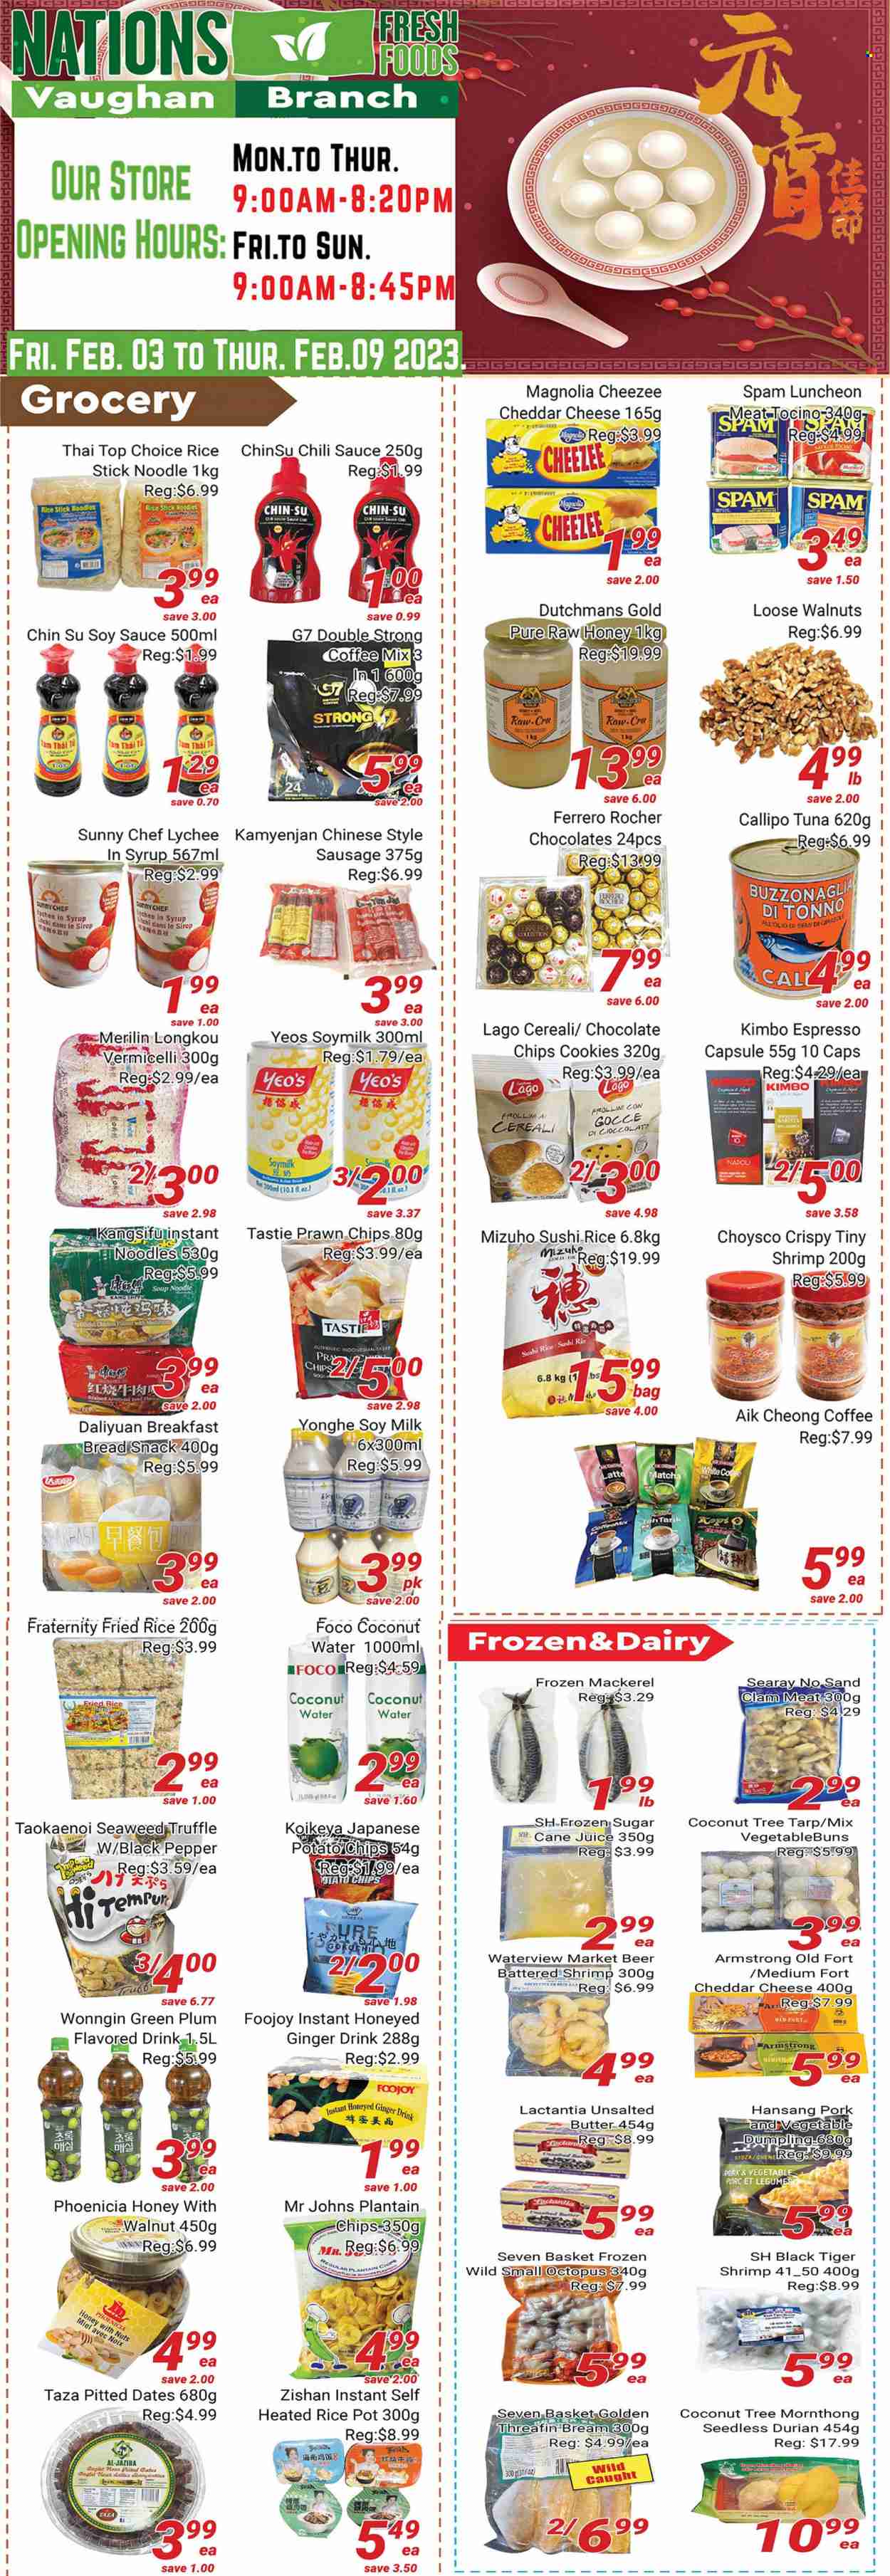 thumbnail - Nations Fresh Foods Flyer - February 03, 2023 - February 09, 2023 - Sales products - bread, ginger, lychee, clams, mackerel, tuna, octopus, prawns, shrimps, soup, instant noodles, sauce, dumplings, noodles, sausage, Spam, lunch meat, soy milk, cookies, snack, truffles, potato chips, sugar, seaweed, black pepper, soy sauce, chilli sauce, honey, walnuts, dried fruit, dried dates, juice, coconut water, matcha, coffee, beer, Ferrero Rocher. Page 1.